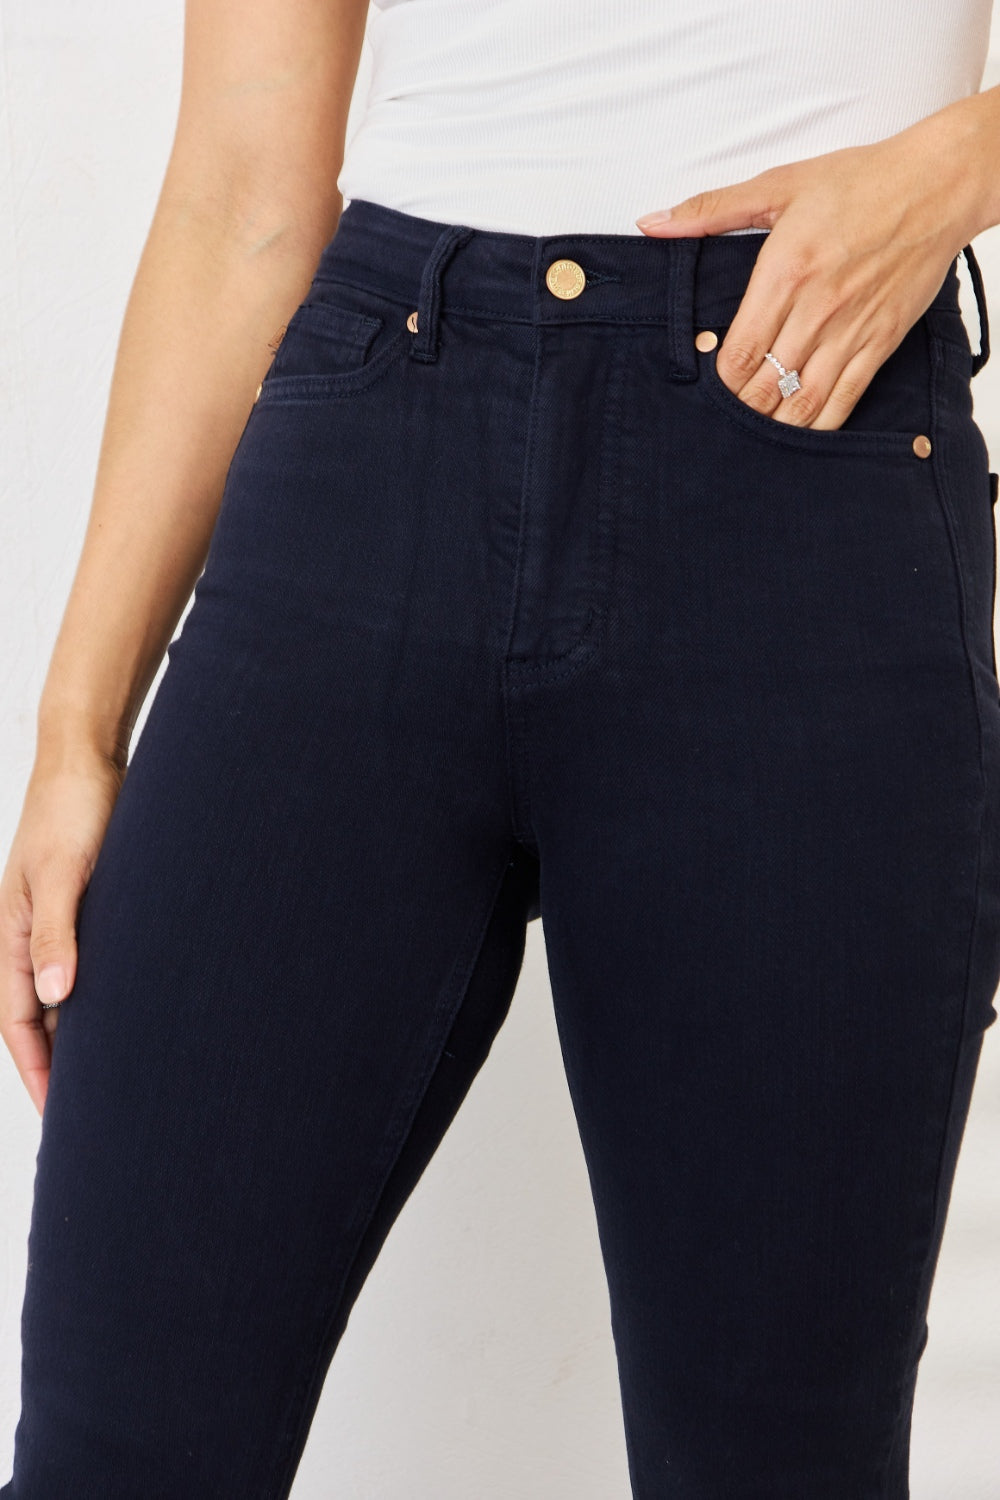 ONLINE ONLY! Judy Blue Full Size Garment Dyed Tummy Control Skinny Jeans